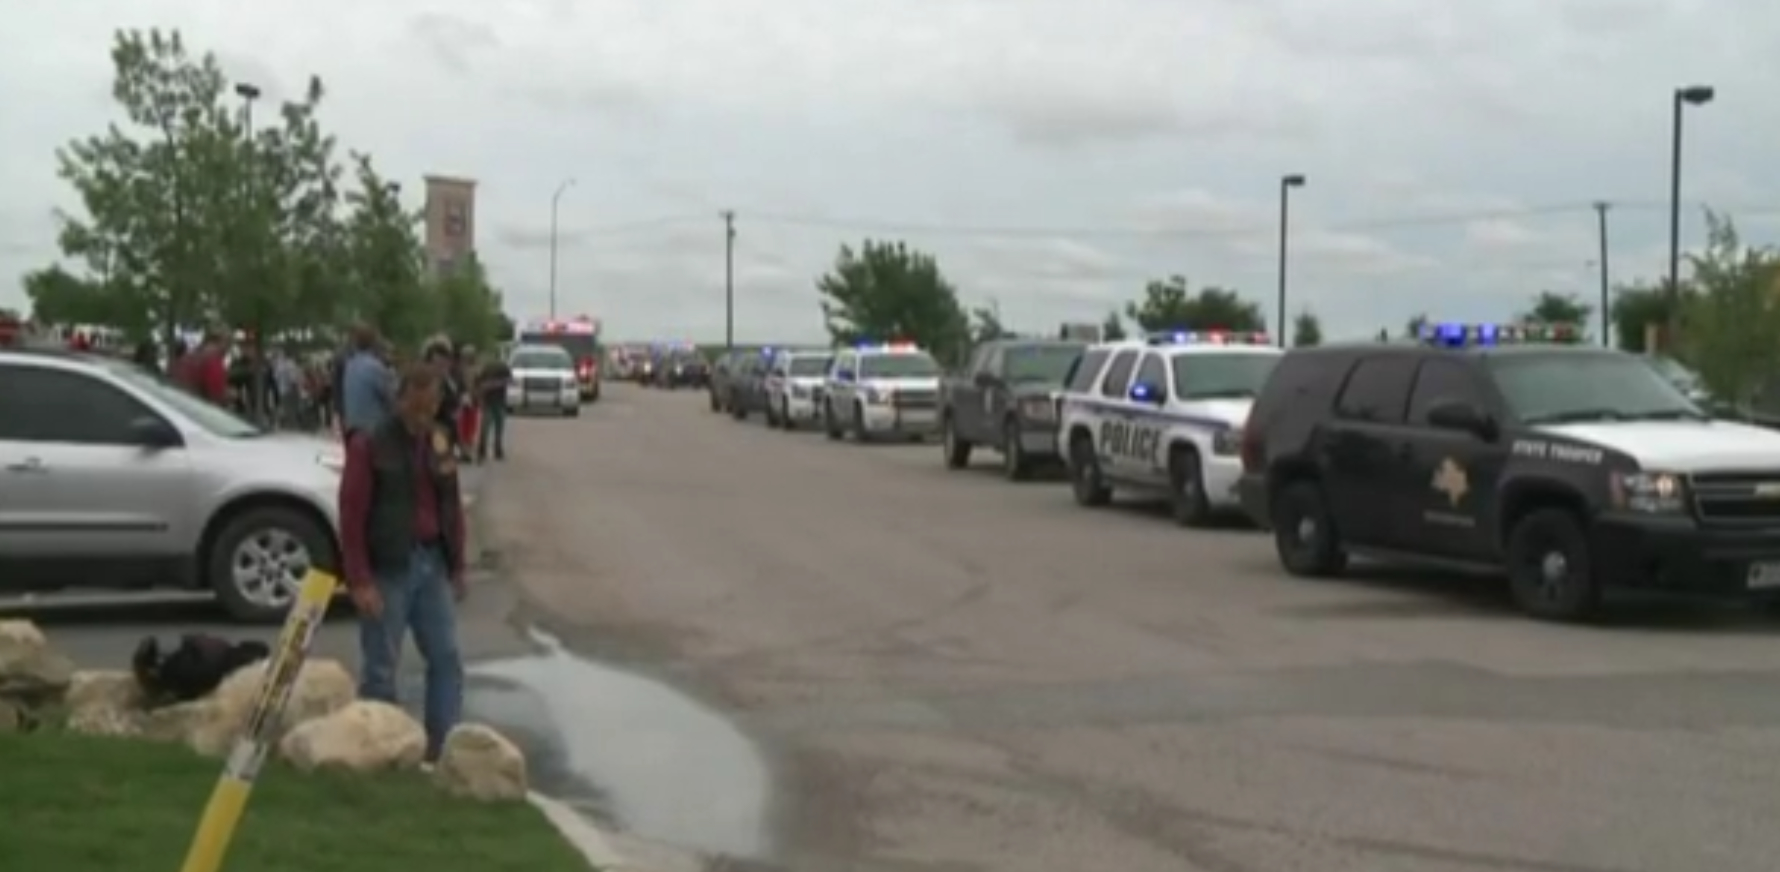 A screengrab from KWTX shows the scene of a shooting in Waco that left at least 9 dead. (KWTX)